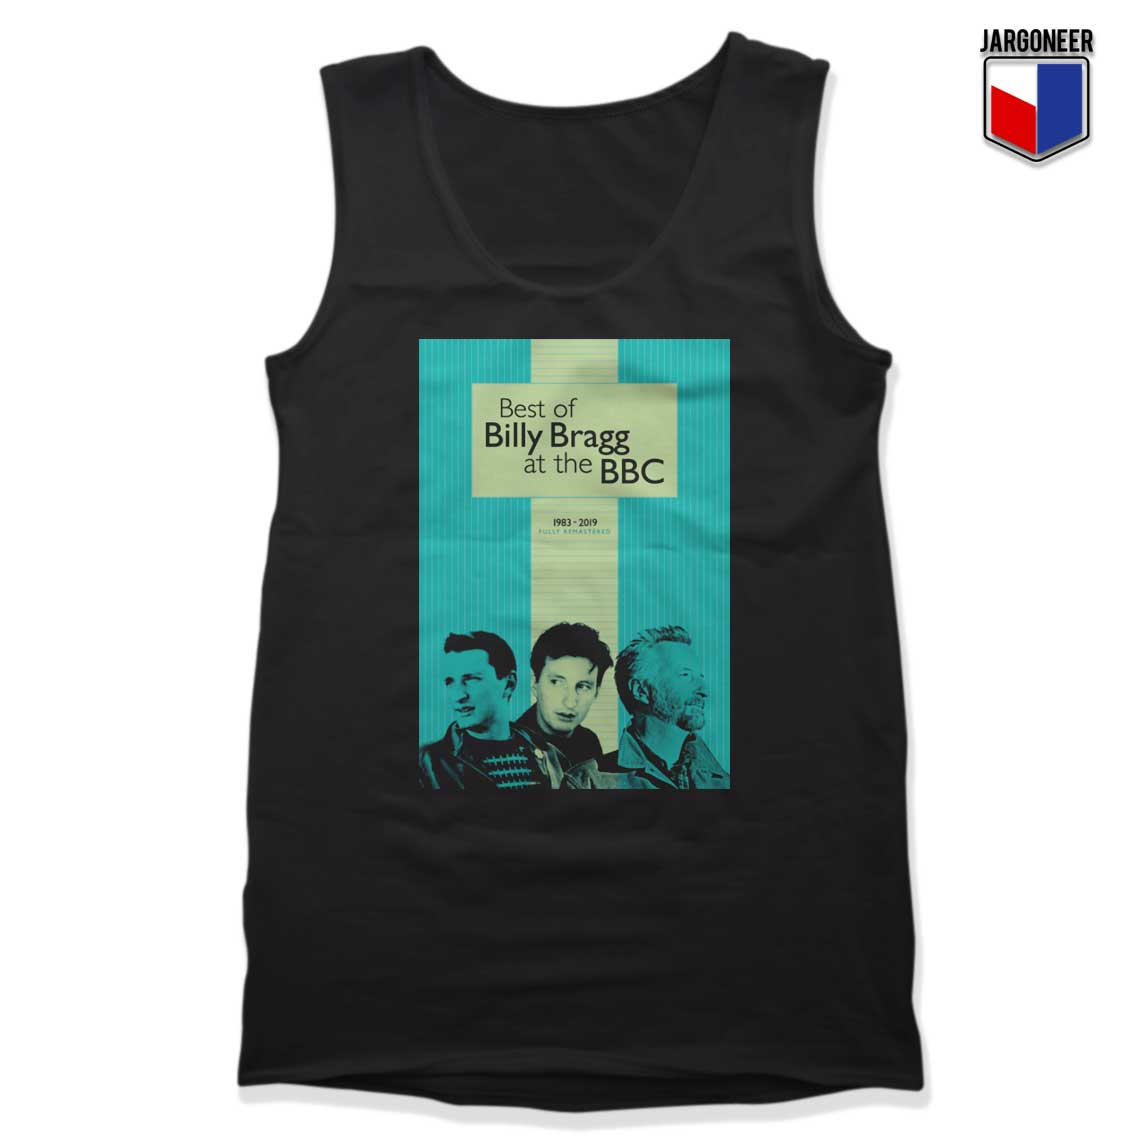 The Best of Billy Bragg at the BBC Tank Top - Shop Unique Graphic Cool Shirt Designs